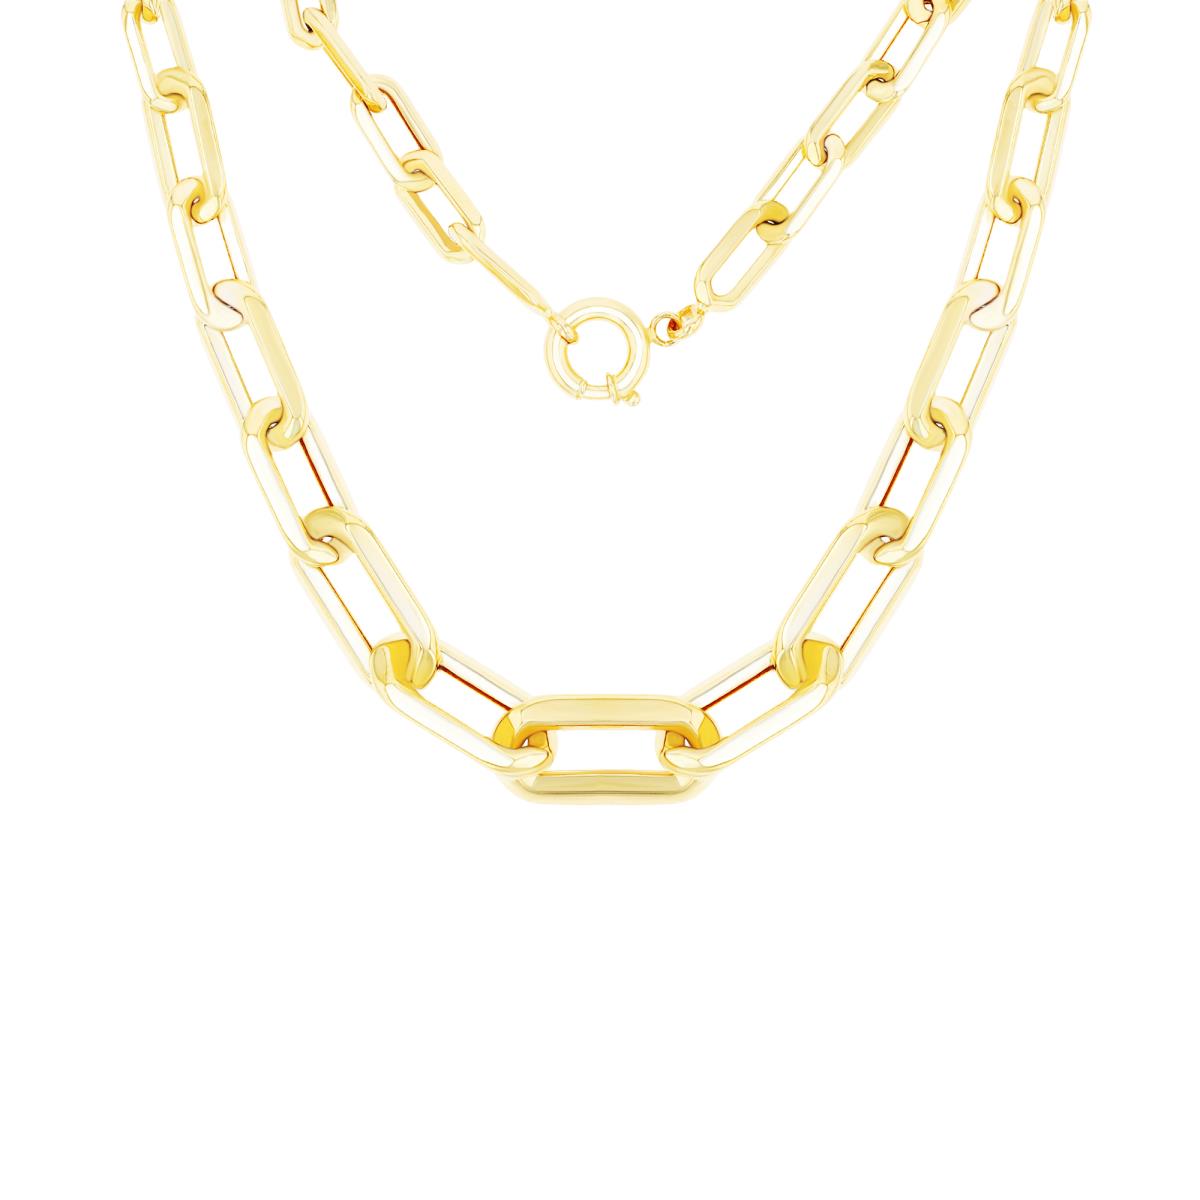 14K Yellow Gold 7mm-13mm Graduated Paperclip 17" Chain Necklace